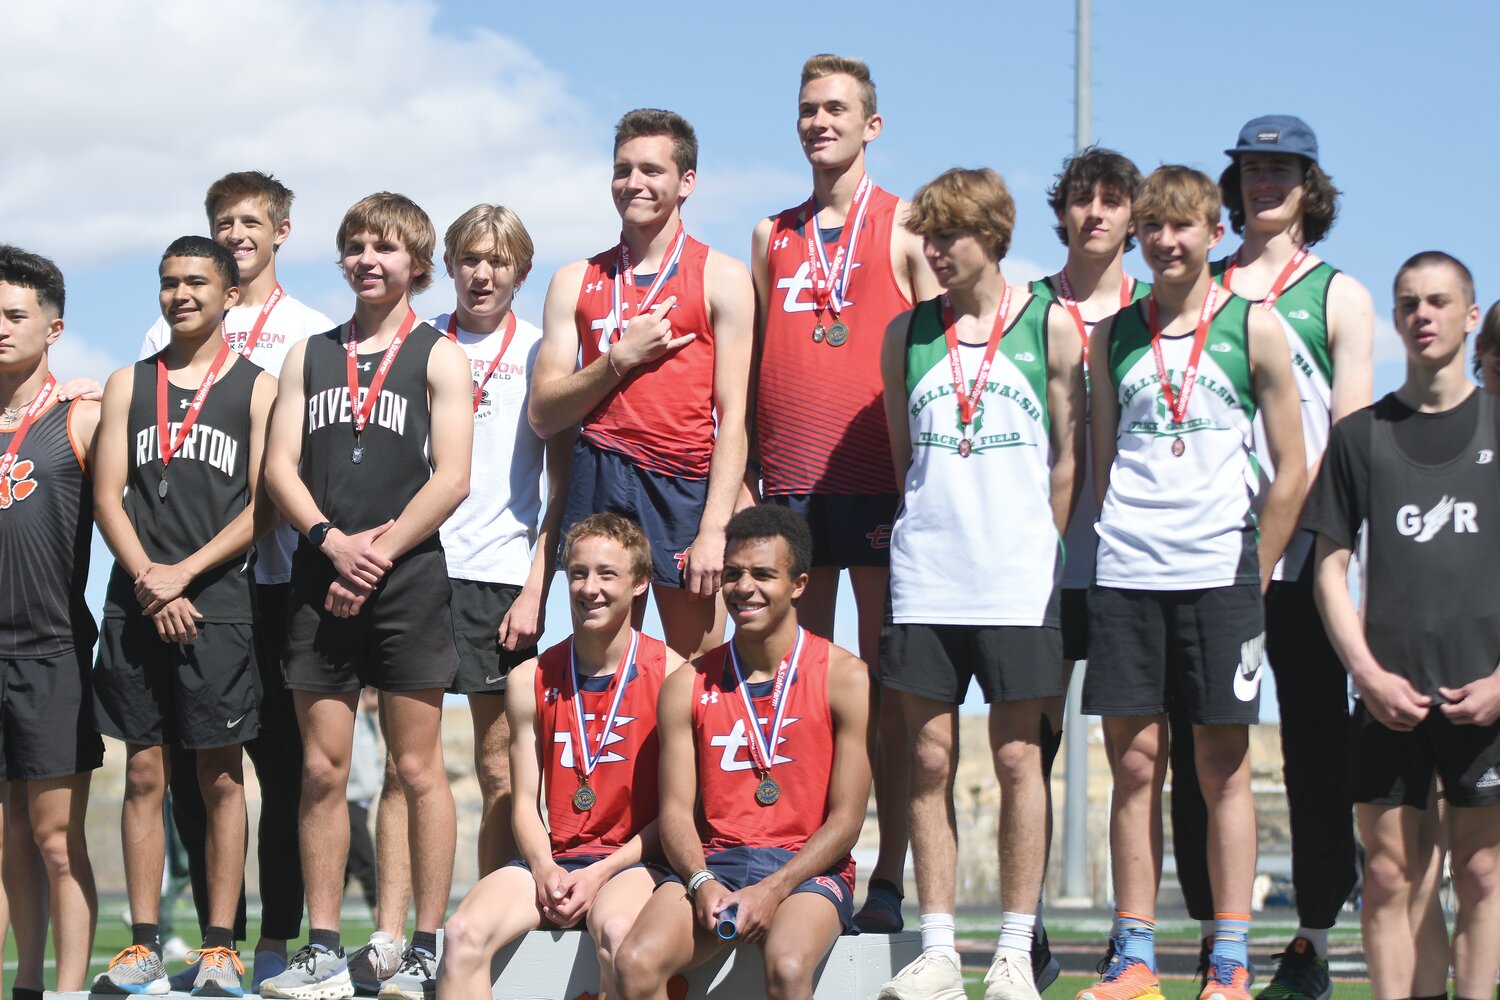 Members of the 4x800 relay team — Gideon Stahl, Paul Baxter (standing), Aidan Conrad and Jamar McDowell (sitting) — are all smiles on the podiium after winning the event in a time of 8:06.56. The time set broke the previous school record of 8:07, set in 1984.